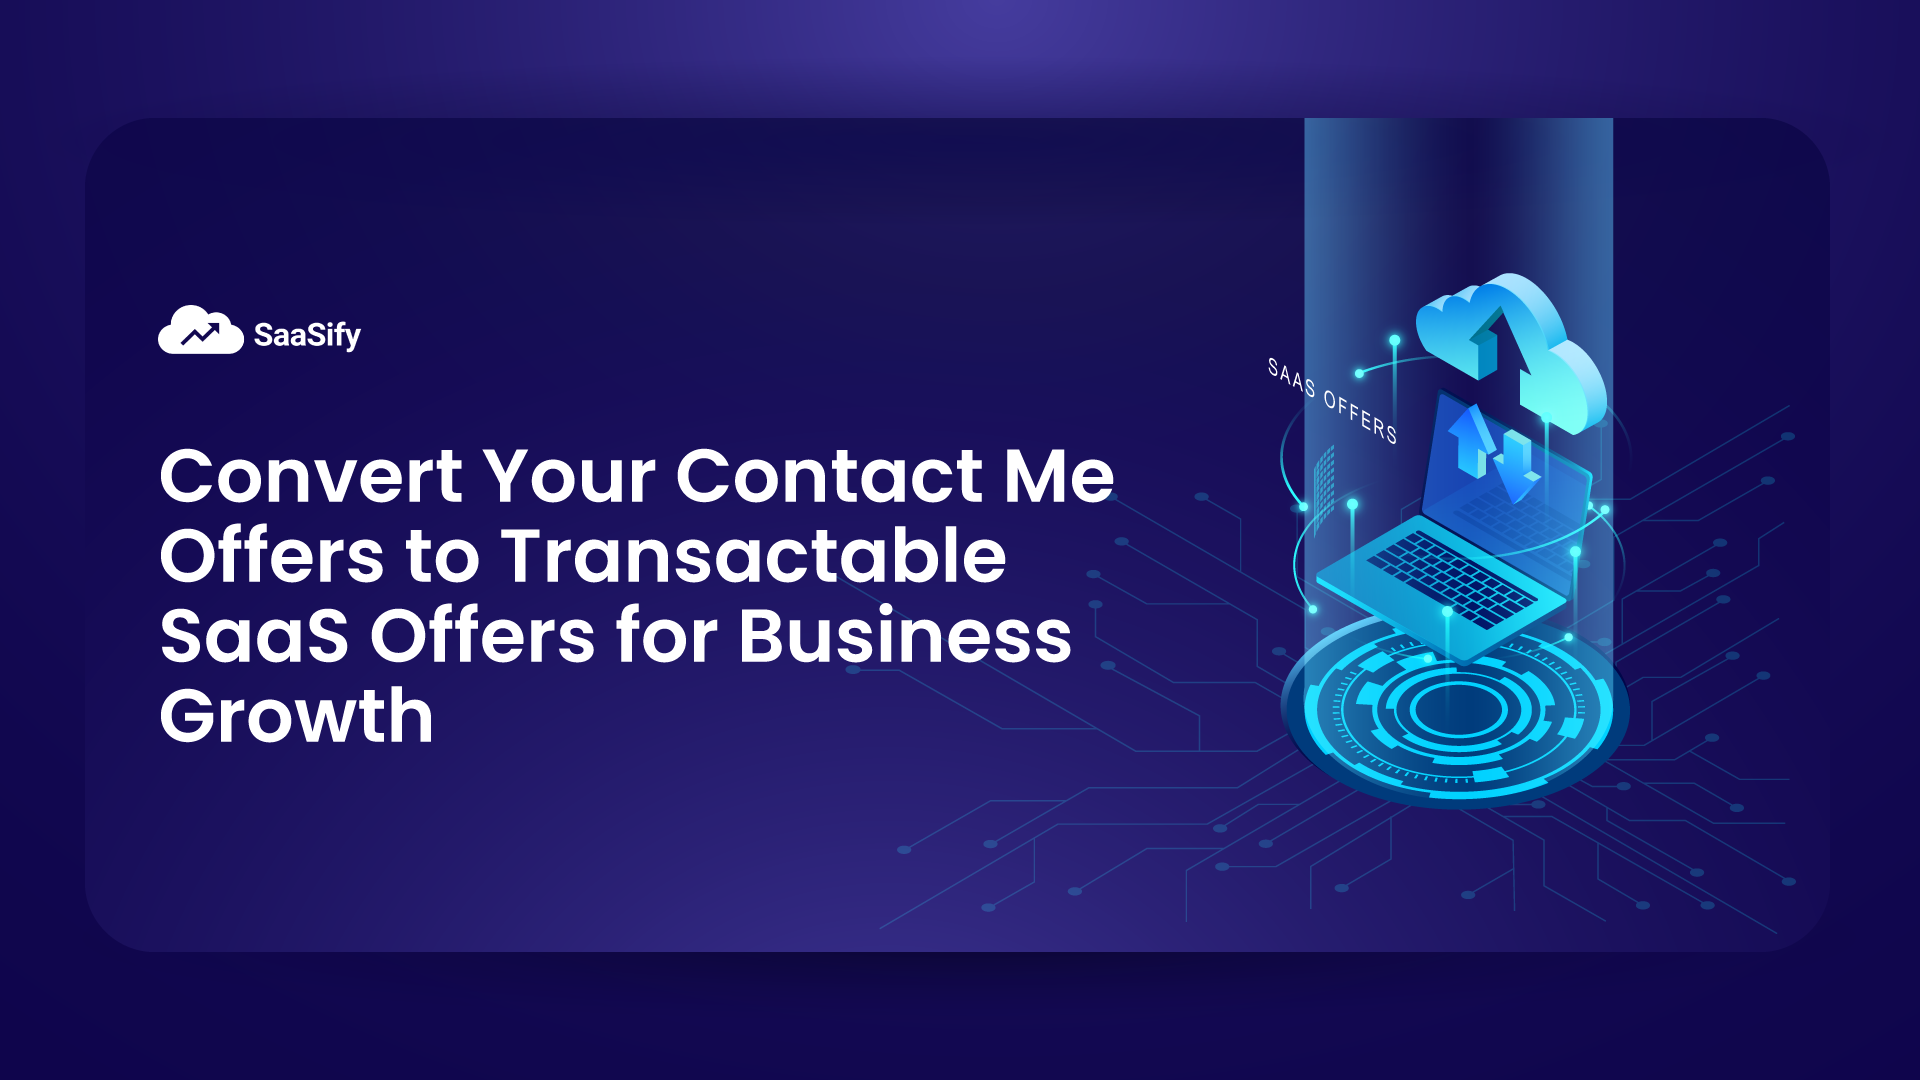 Convert Your Contact Me Offers to Transactable SaaS Offers for Business Growth